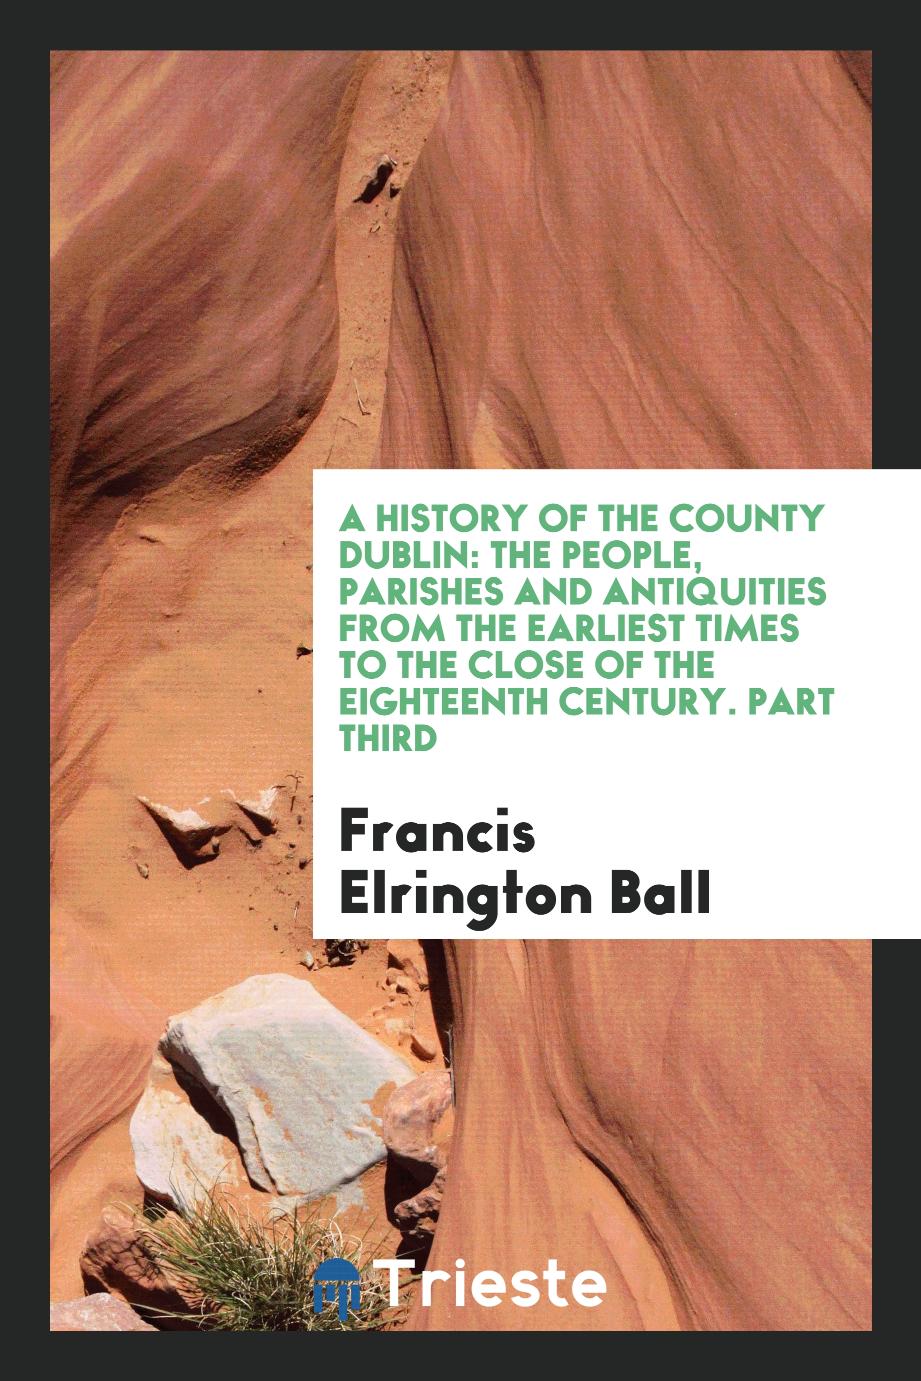 A History of the County Dublin: The People, Parishes and Antiquities from the Earliest Times to the Close of the Eighteenth Century. Part Third